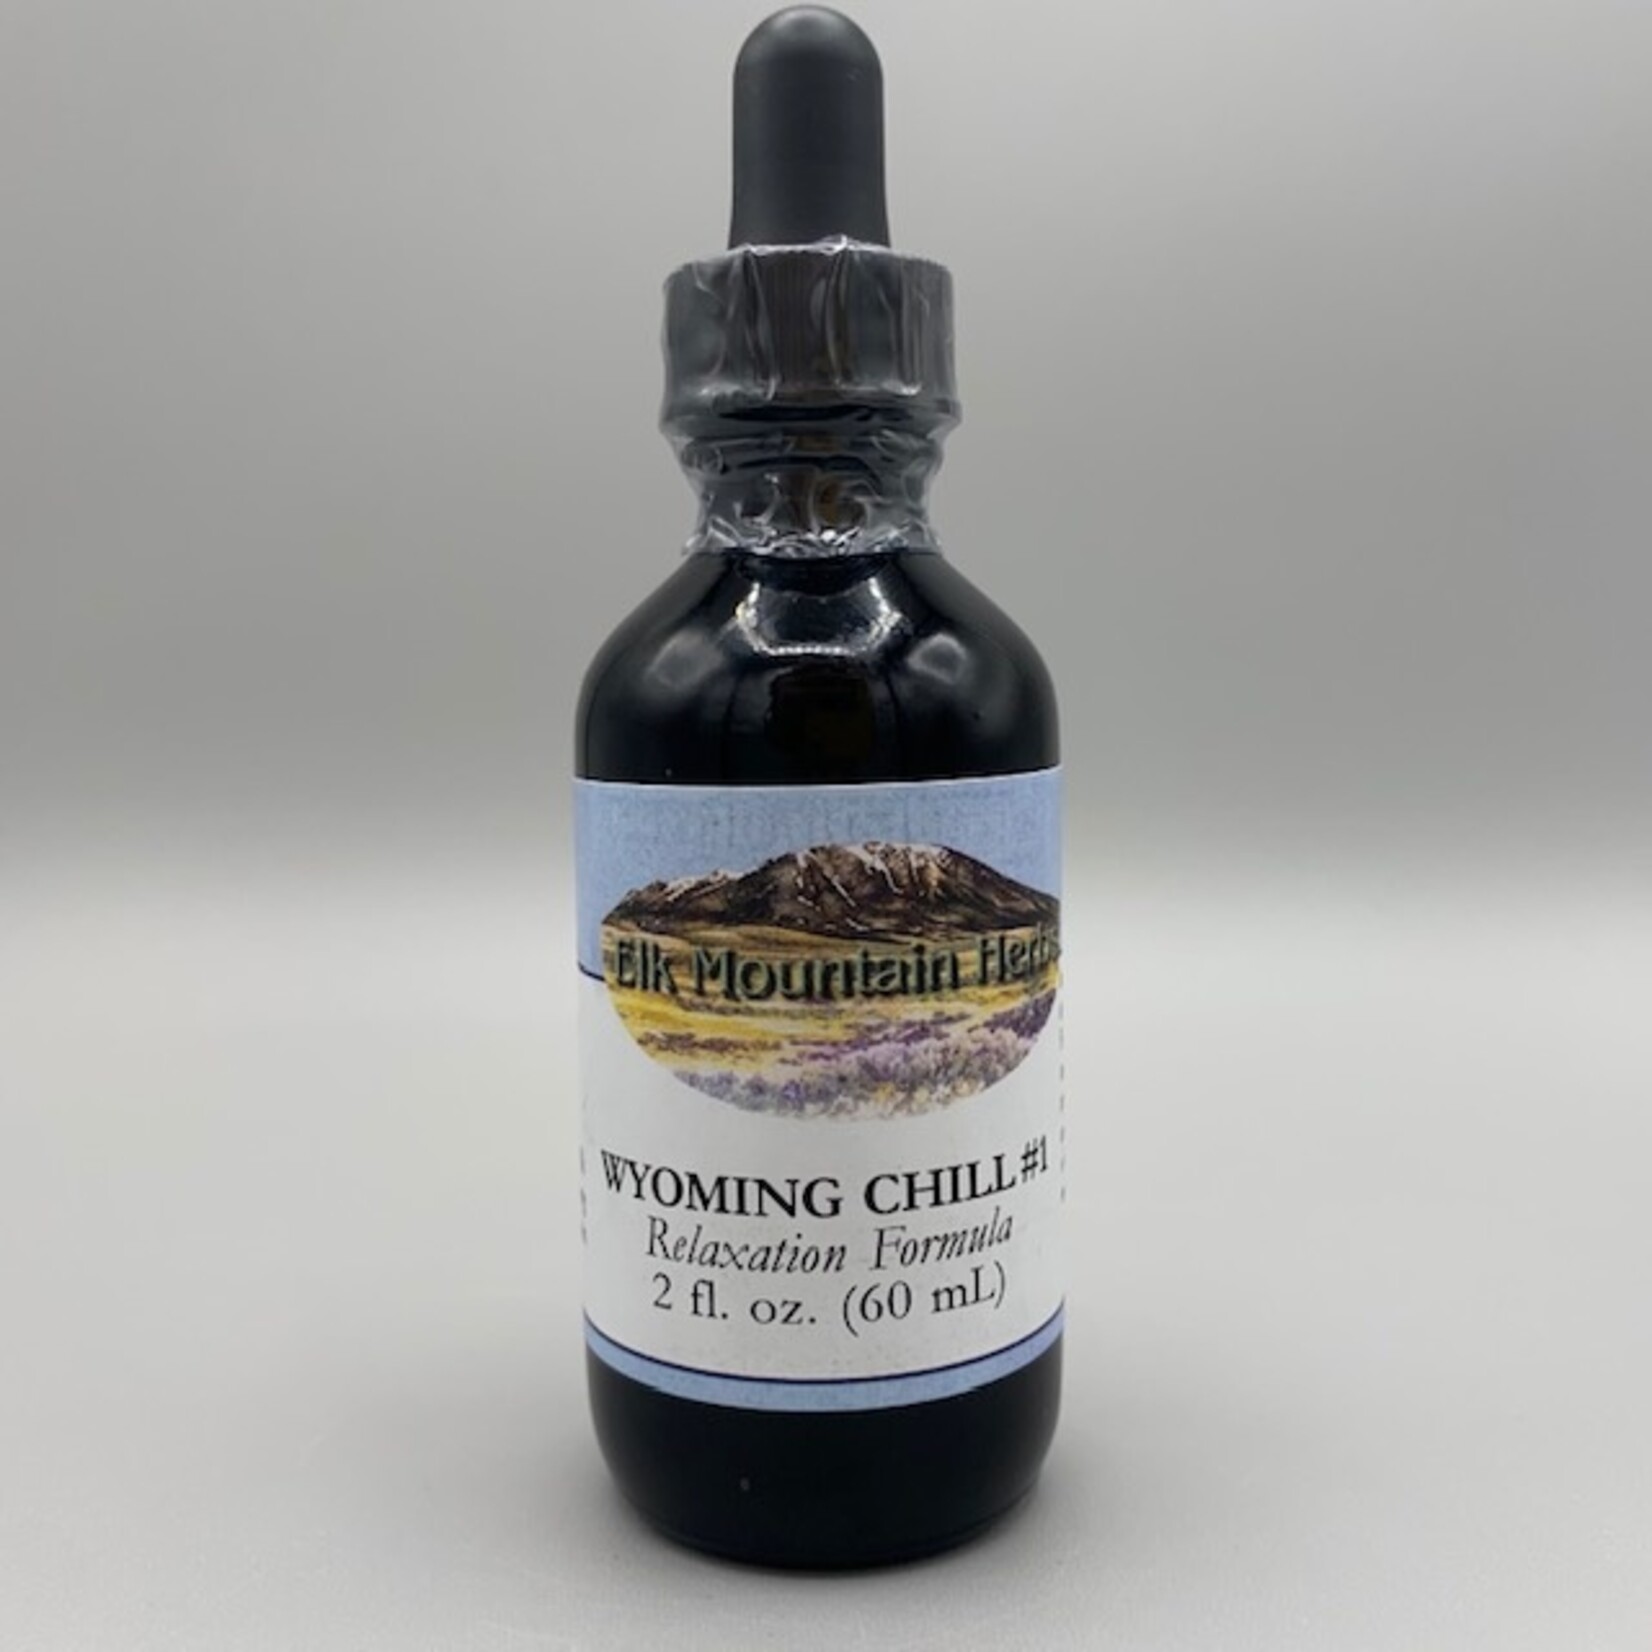 Elk Mountain Herbs EMH: Wyoming Chill #1 Formula Tincture